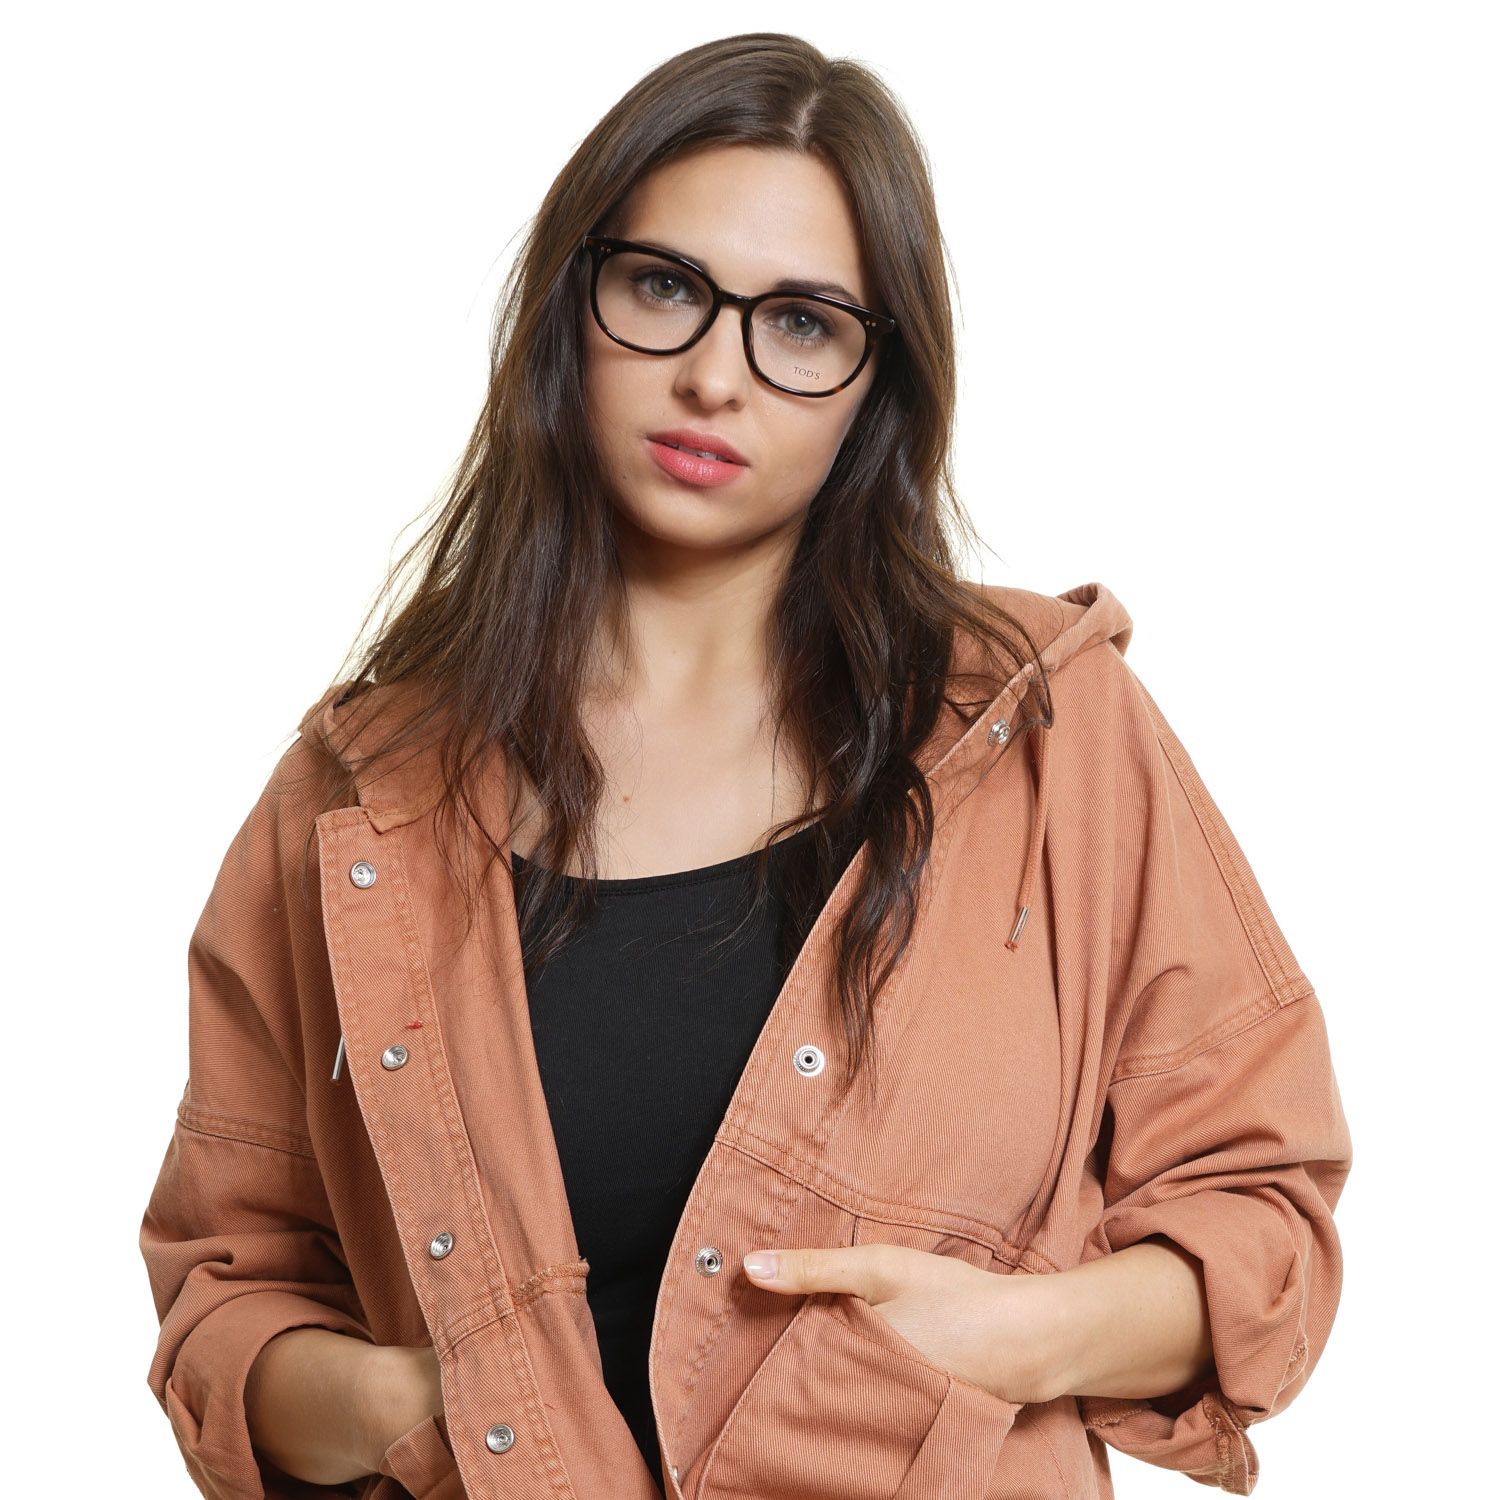 Tods Optical Frame TO5202 052 52 Women
Frame color: Brown
Size: 52-16-145
Lenses width: 52
Lenses heigth: 46
Bridge length: 16
Frame width: 137
Temple length: 145
Shipment includes: Case, Cleaning cloth
Style: Full-Rim
Spring hinge: No